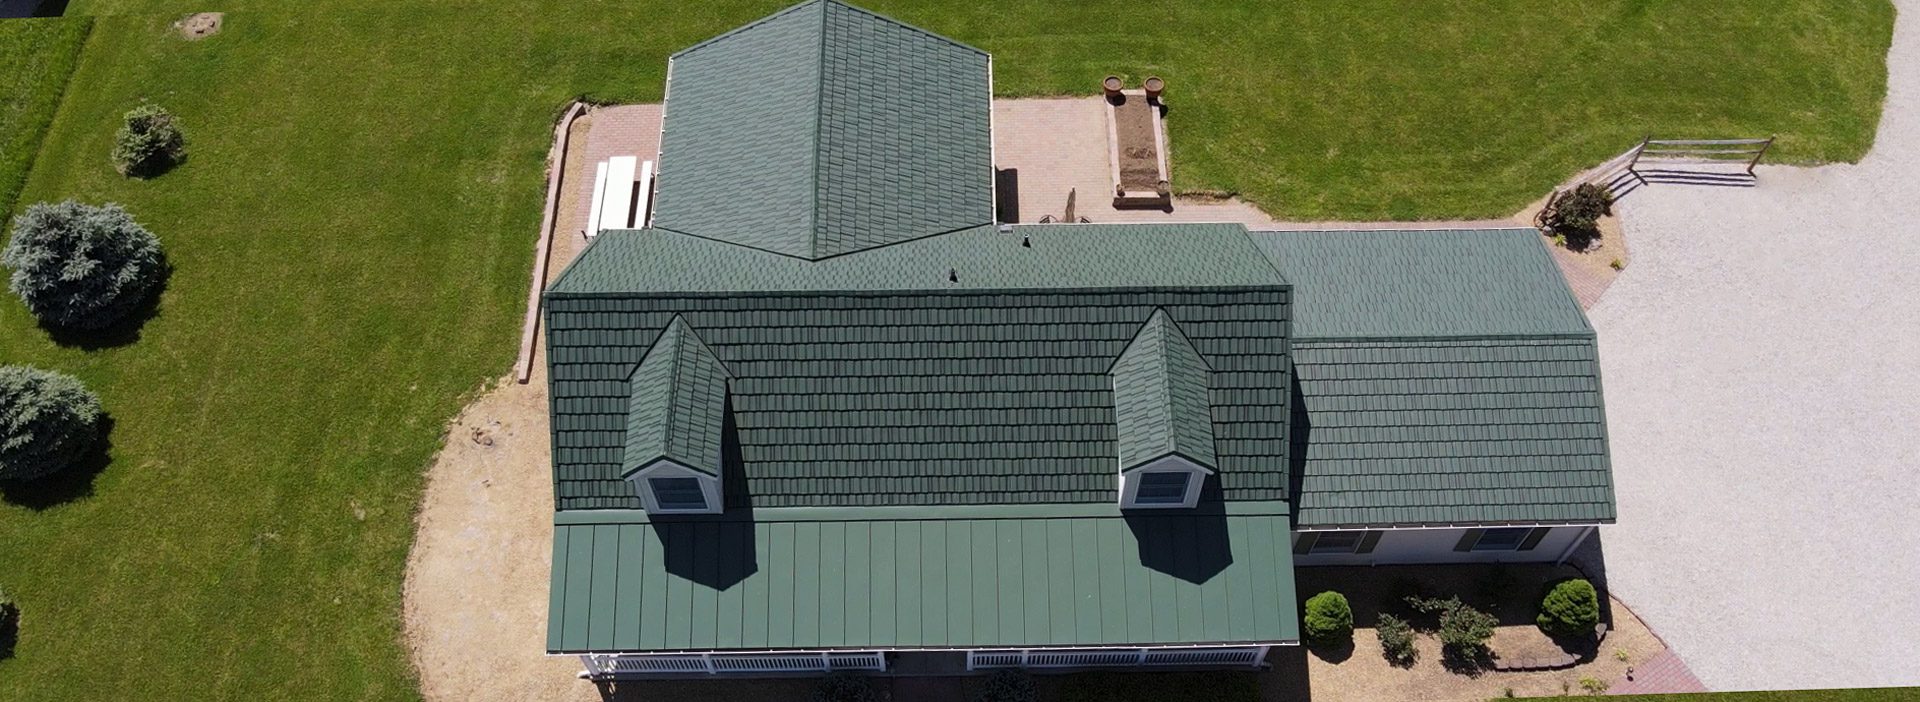 The Sky Is the Limit for Drones in Roofing